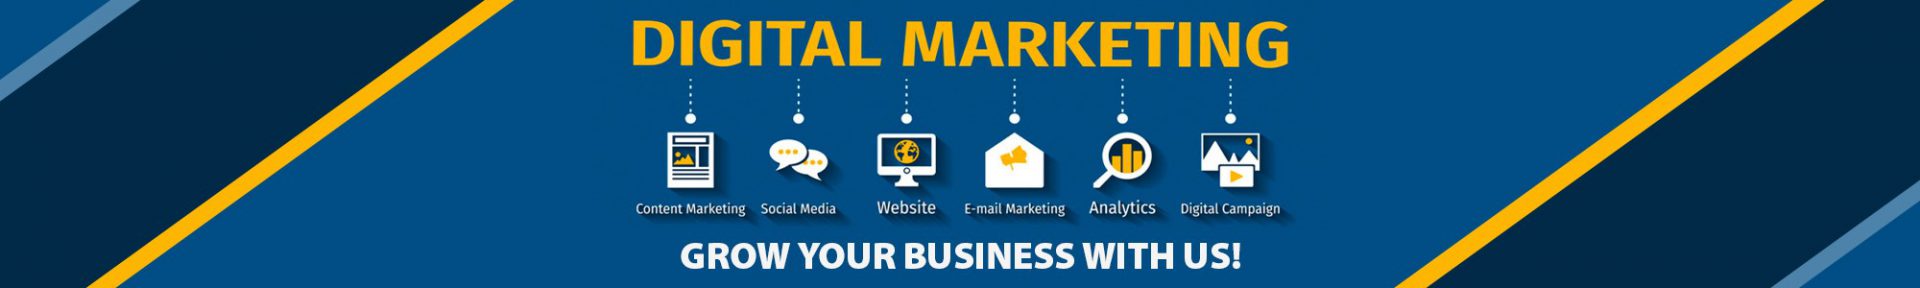 Digital marketing banner with different services